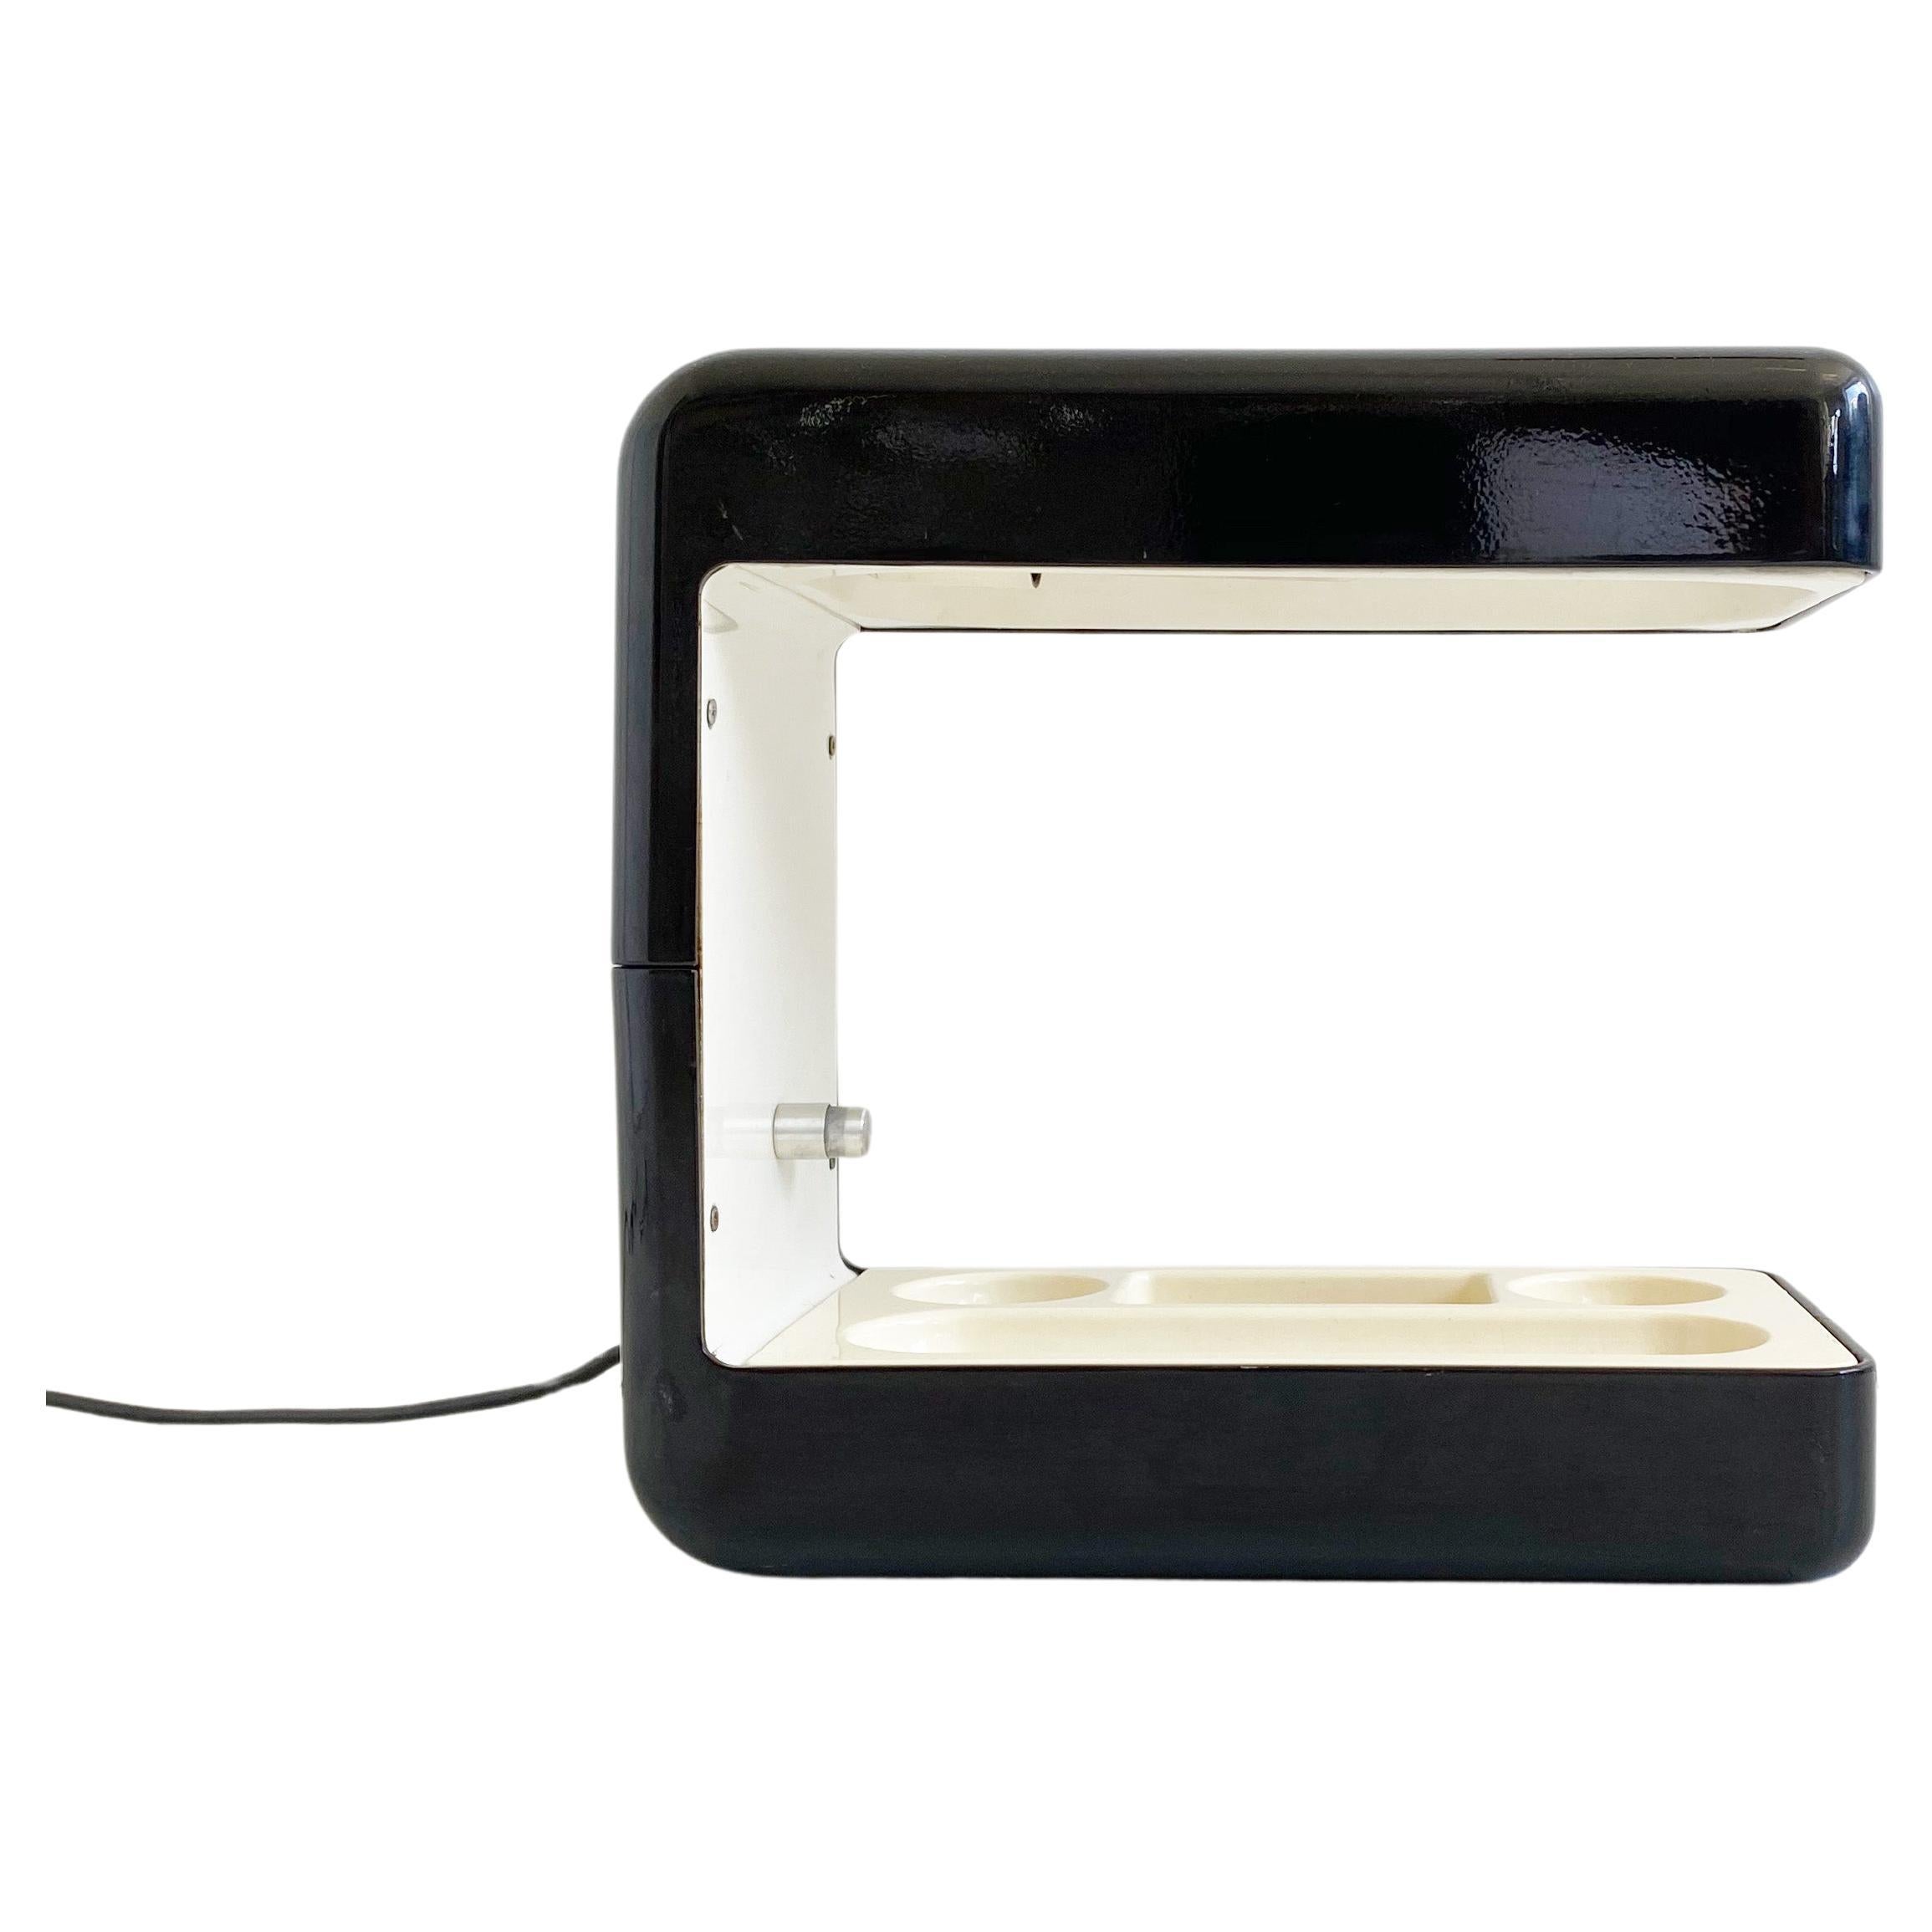 Lack Metal 'Isos' Desk Lamp by Giotto Stoppino, Italy, c.1970 For Sale